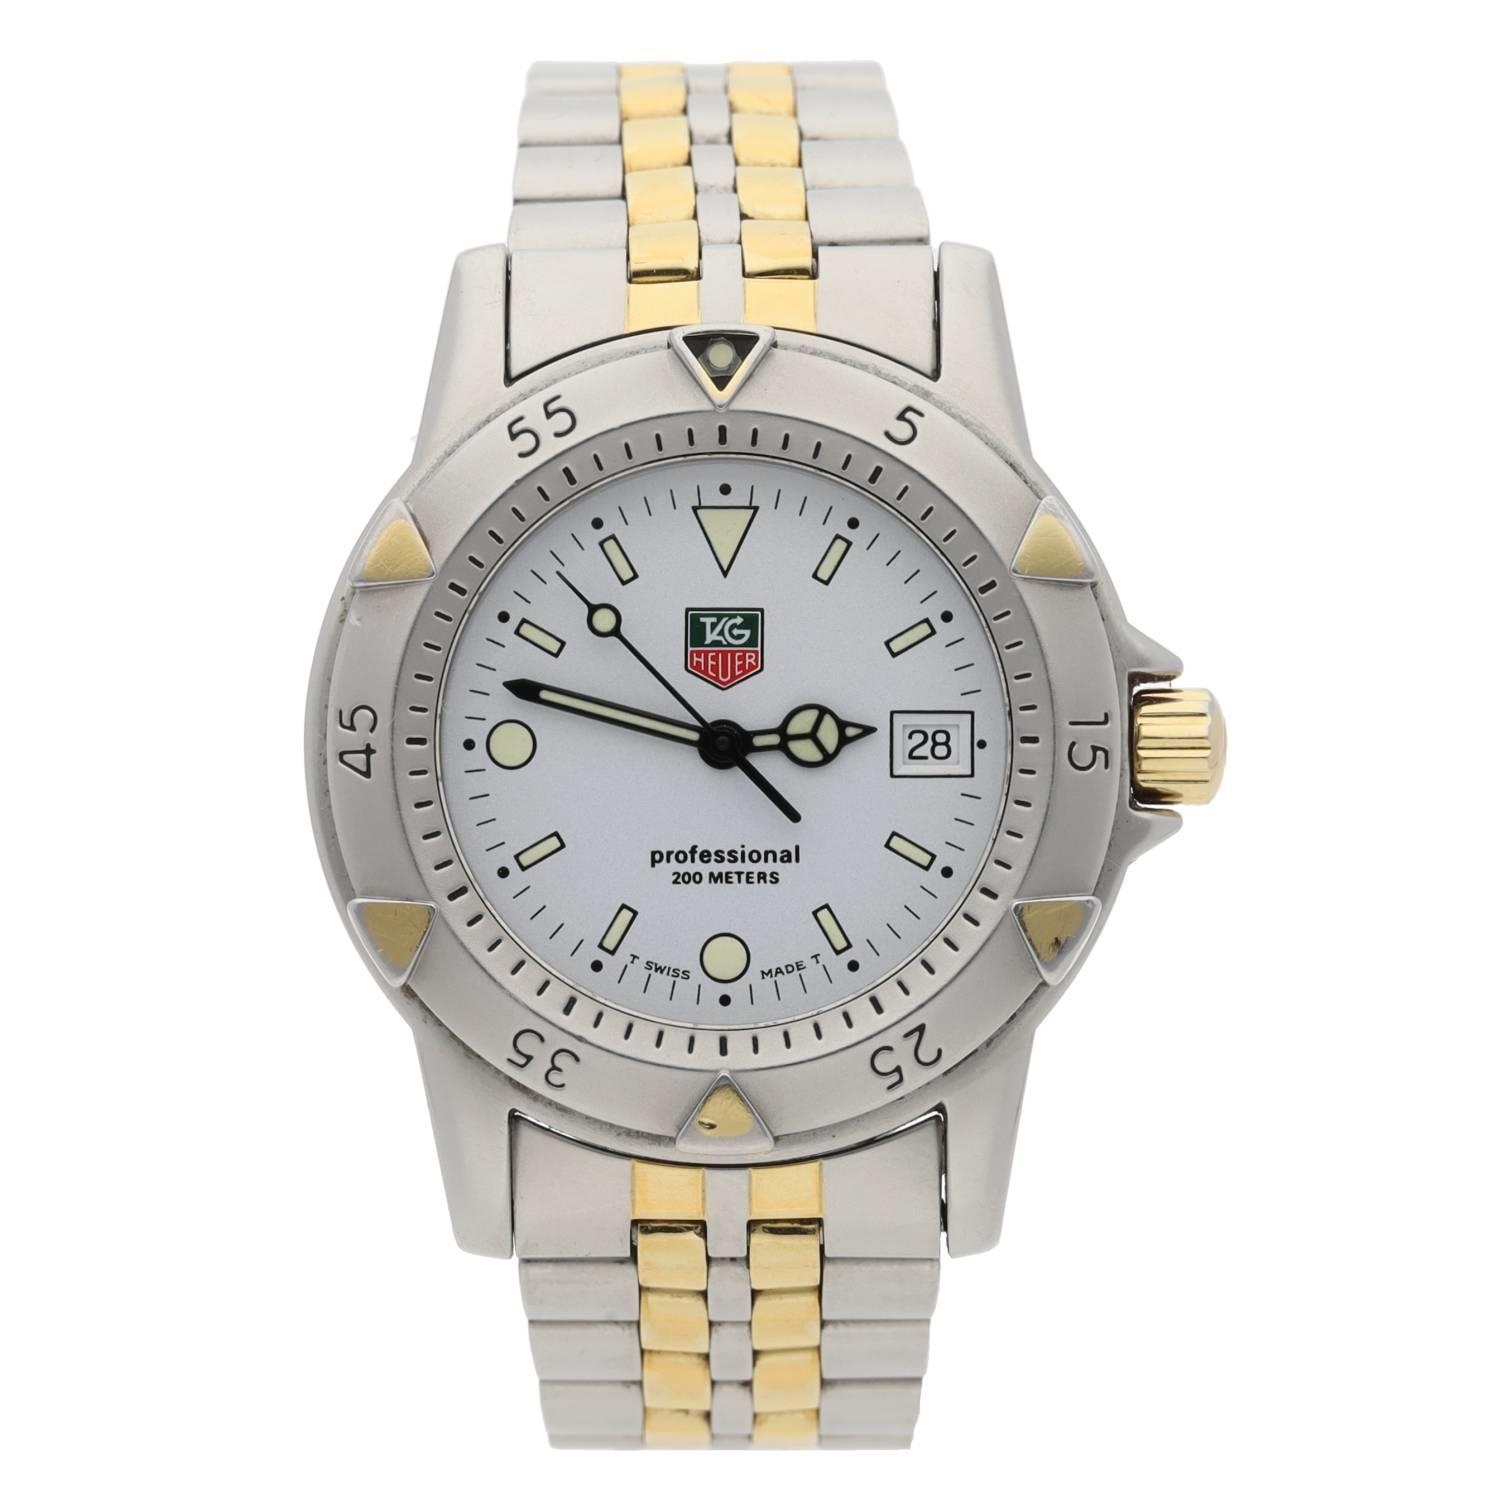 Tag Heuer 1500 Series bicolour gentleman's wristwatch, reference no. WD1221-K-20, serial no. WD6xxx,